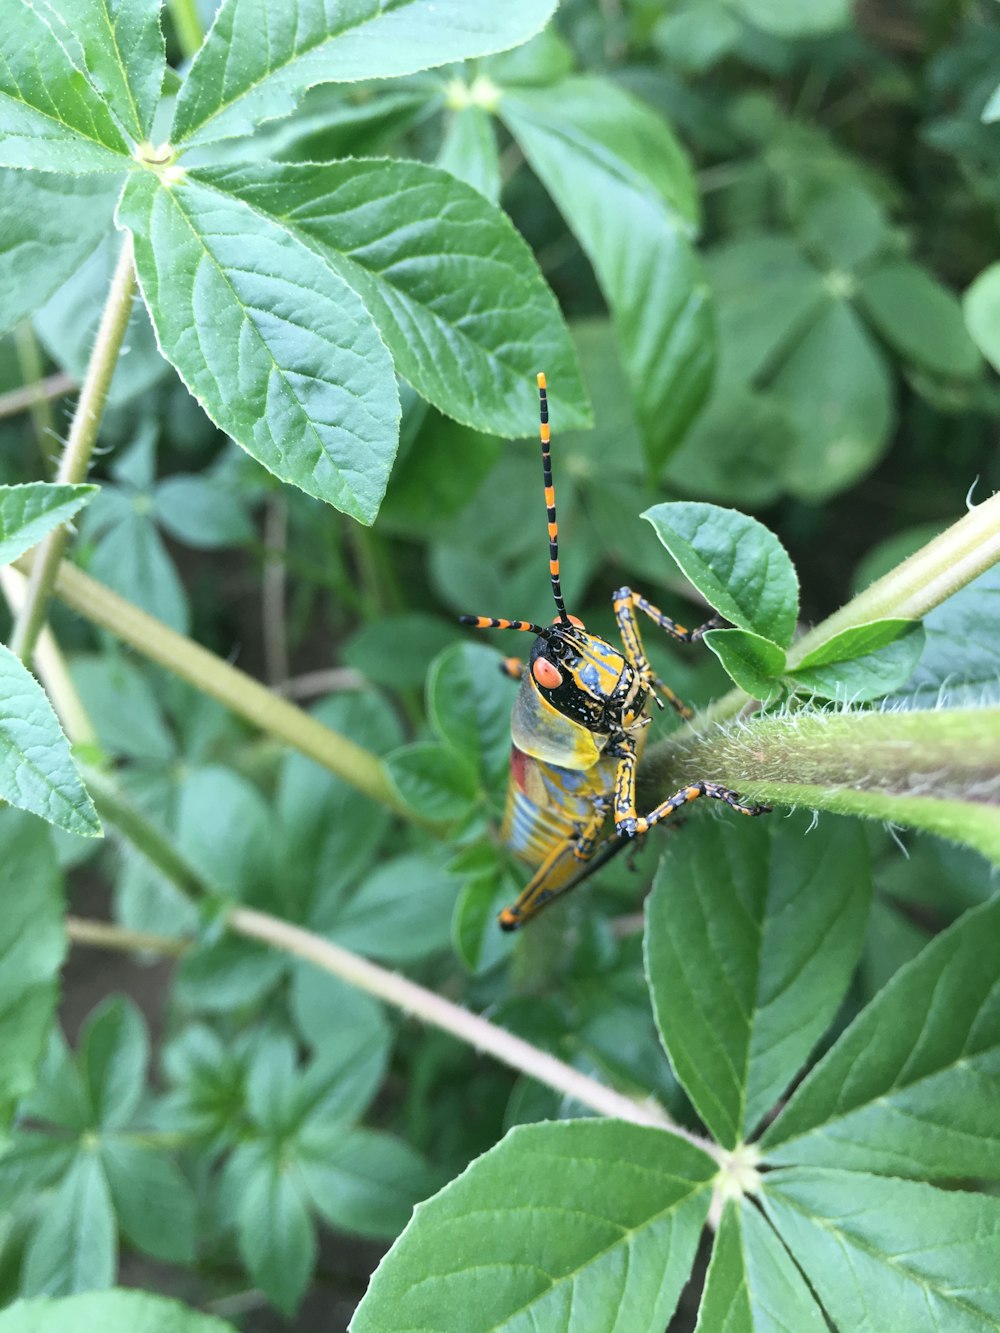 yellow and black insect on green leaf during daytime